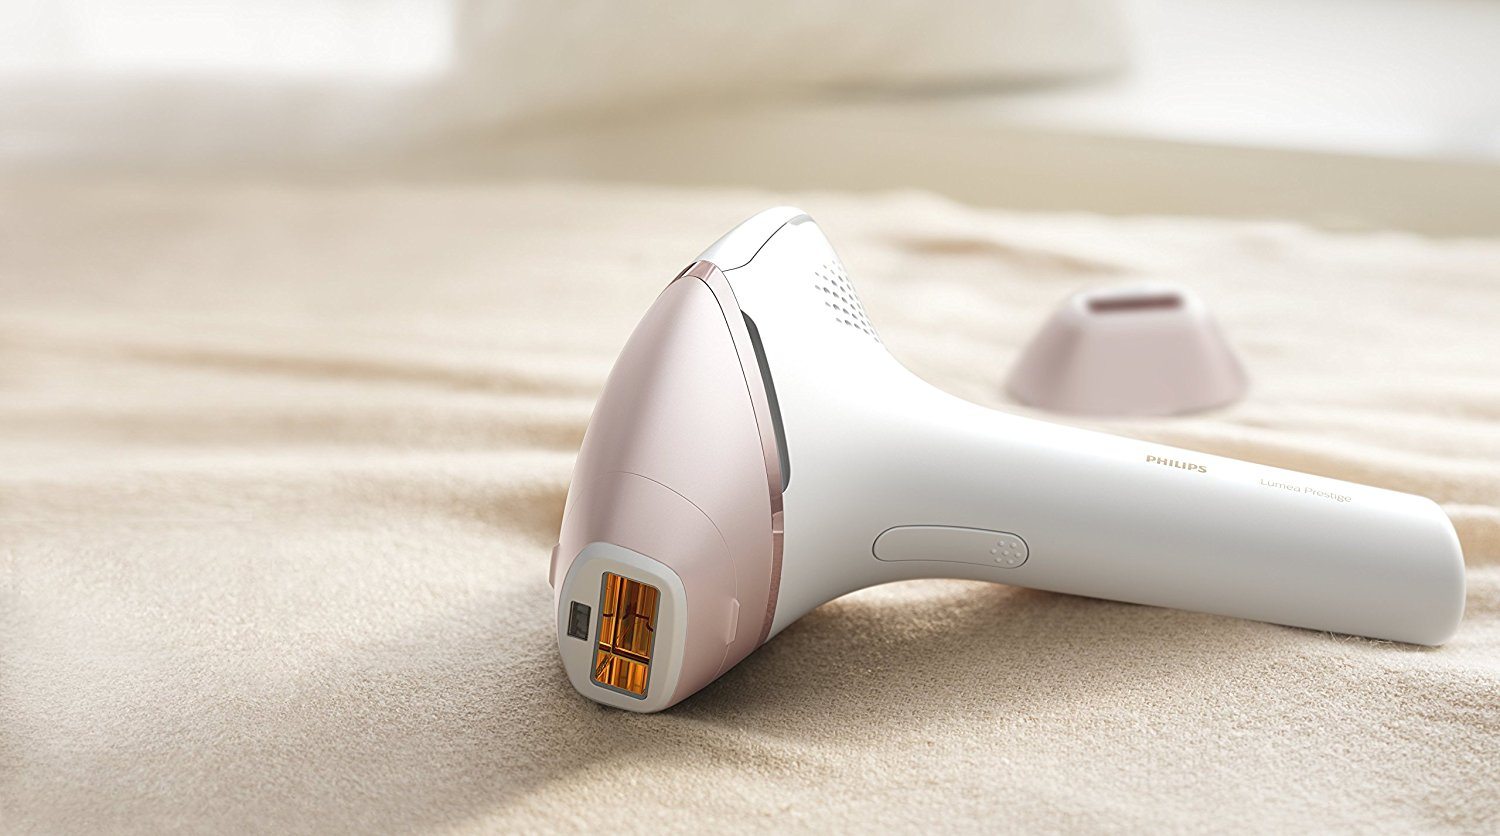 Philips Lumea Review Best Philips Lumea 2017 2018